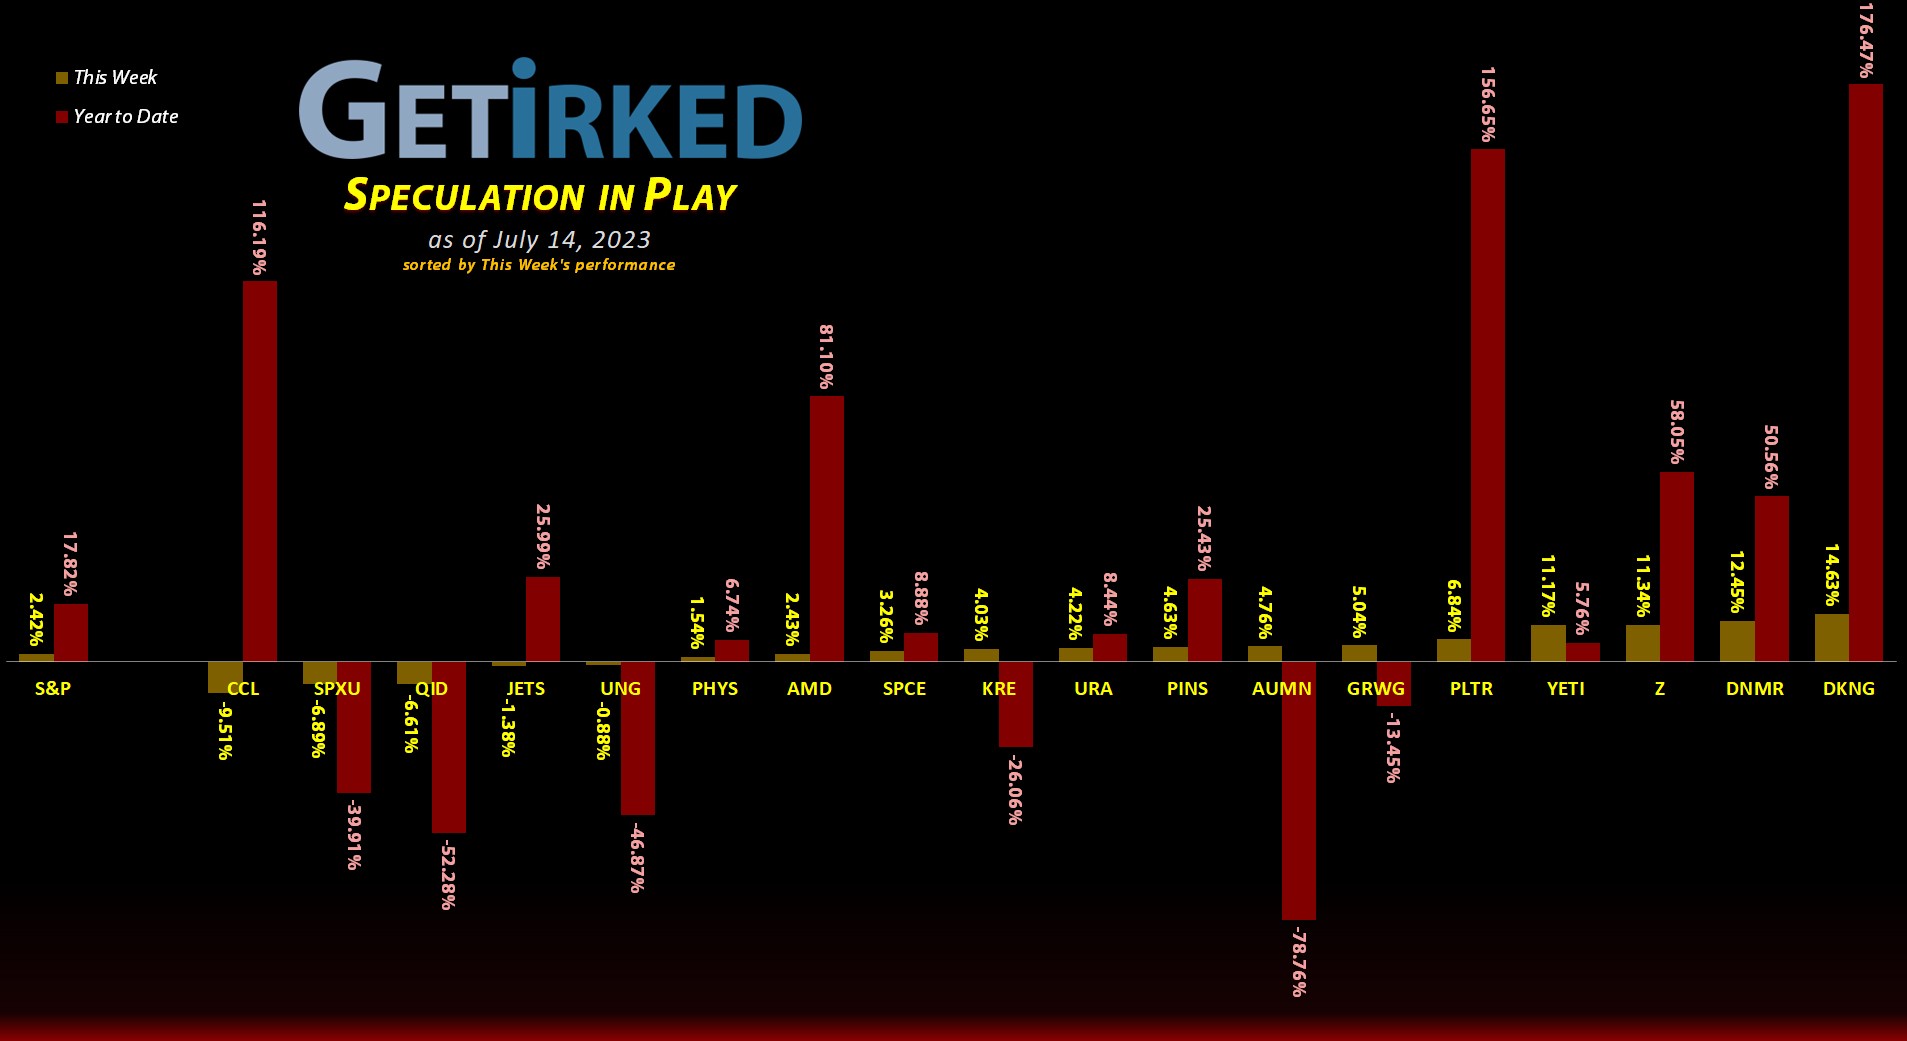 Get Irked's Speculation in Play - July 14, 2023